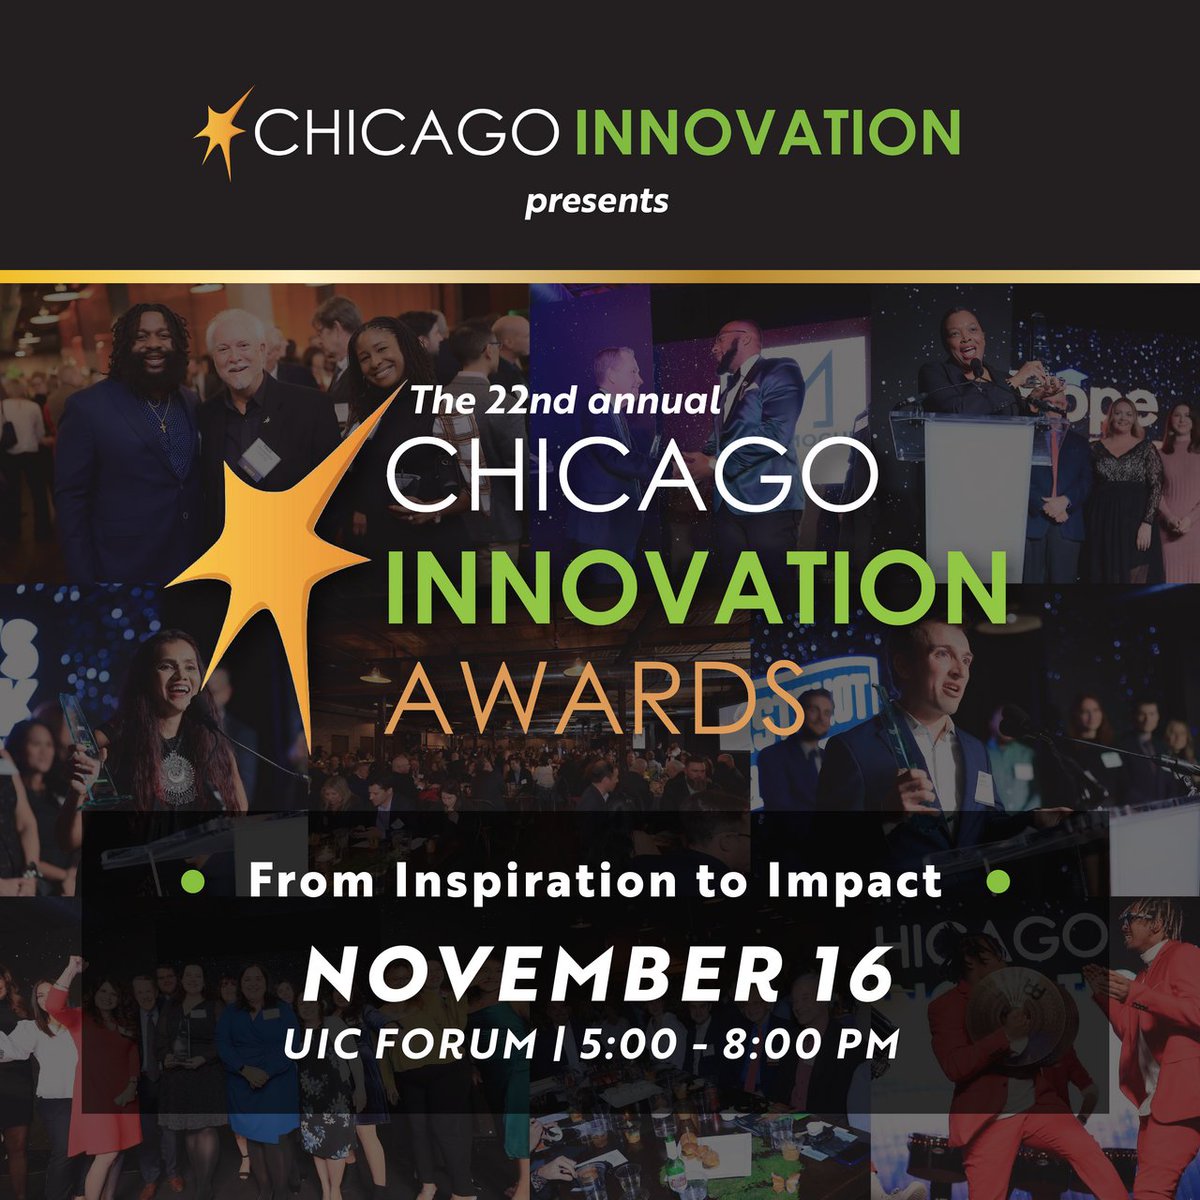 Celebrate the top innovators in the Chicago region at the 22nd annual @Chi_Innovation Awards on November 16th. mHUB CEO Haven Allen will also be attending as an award presenter. RSVP now: hubs.la/Q0257KRh0 #chicagoevents #chicago #chicagoinnoawards #innovation